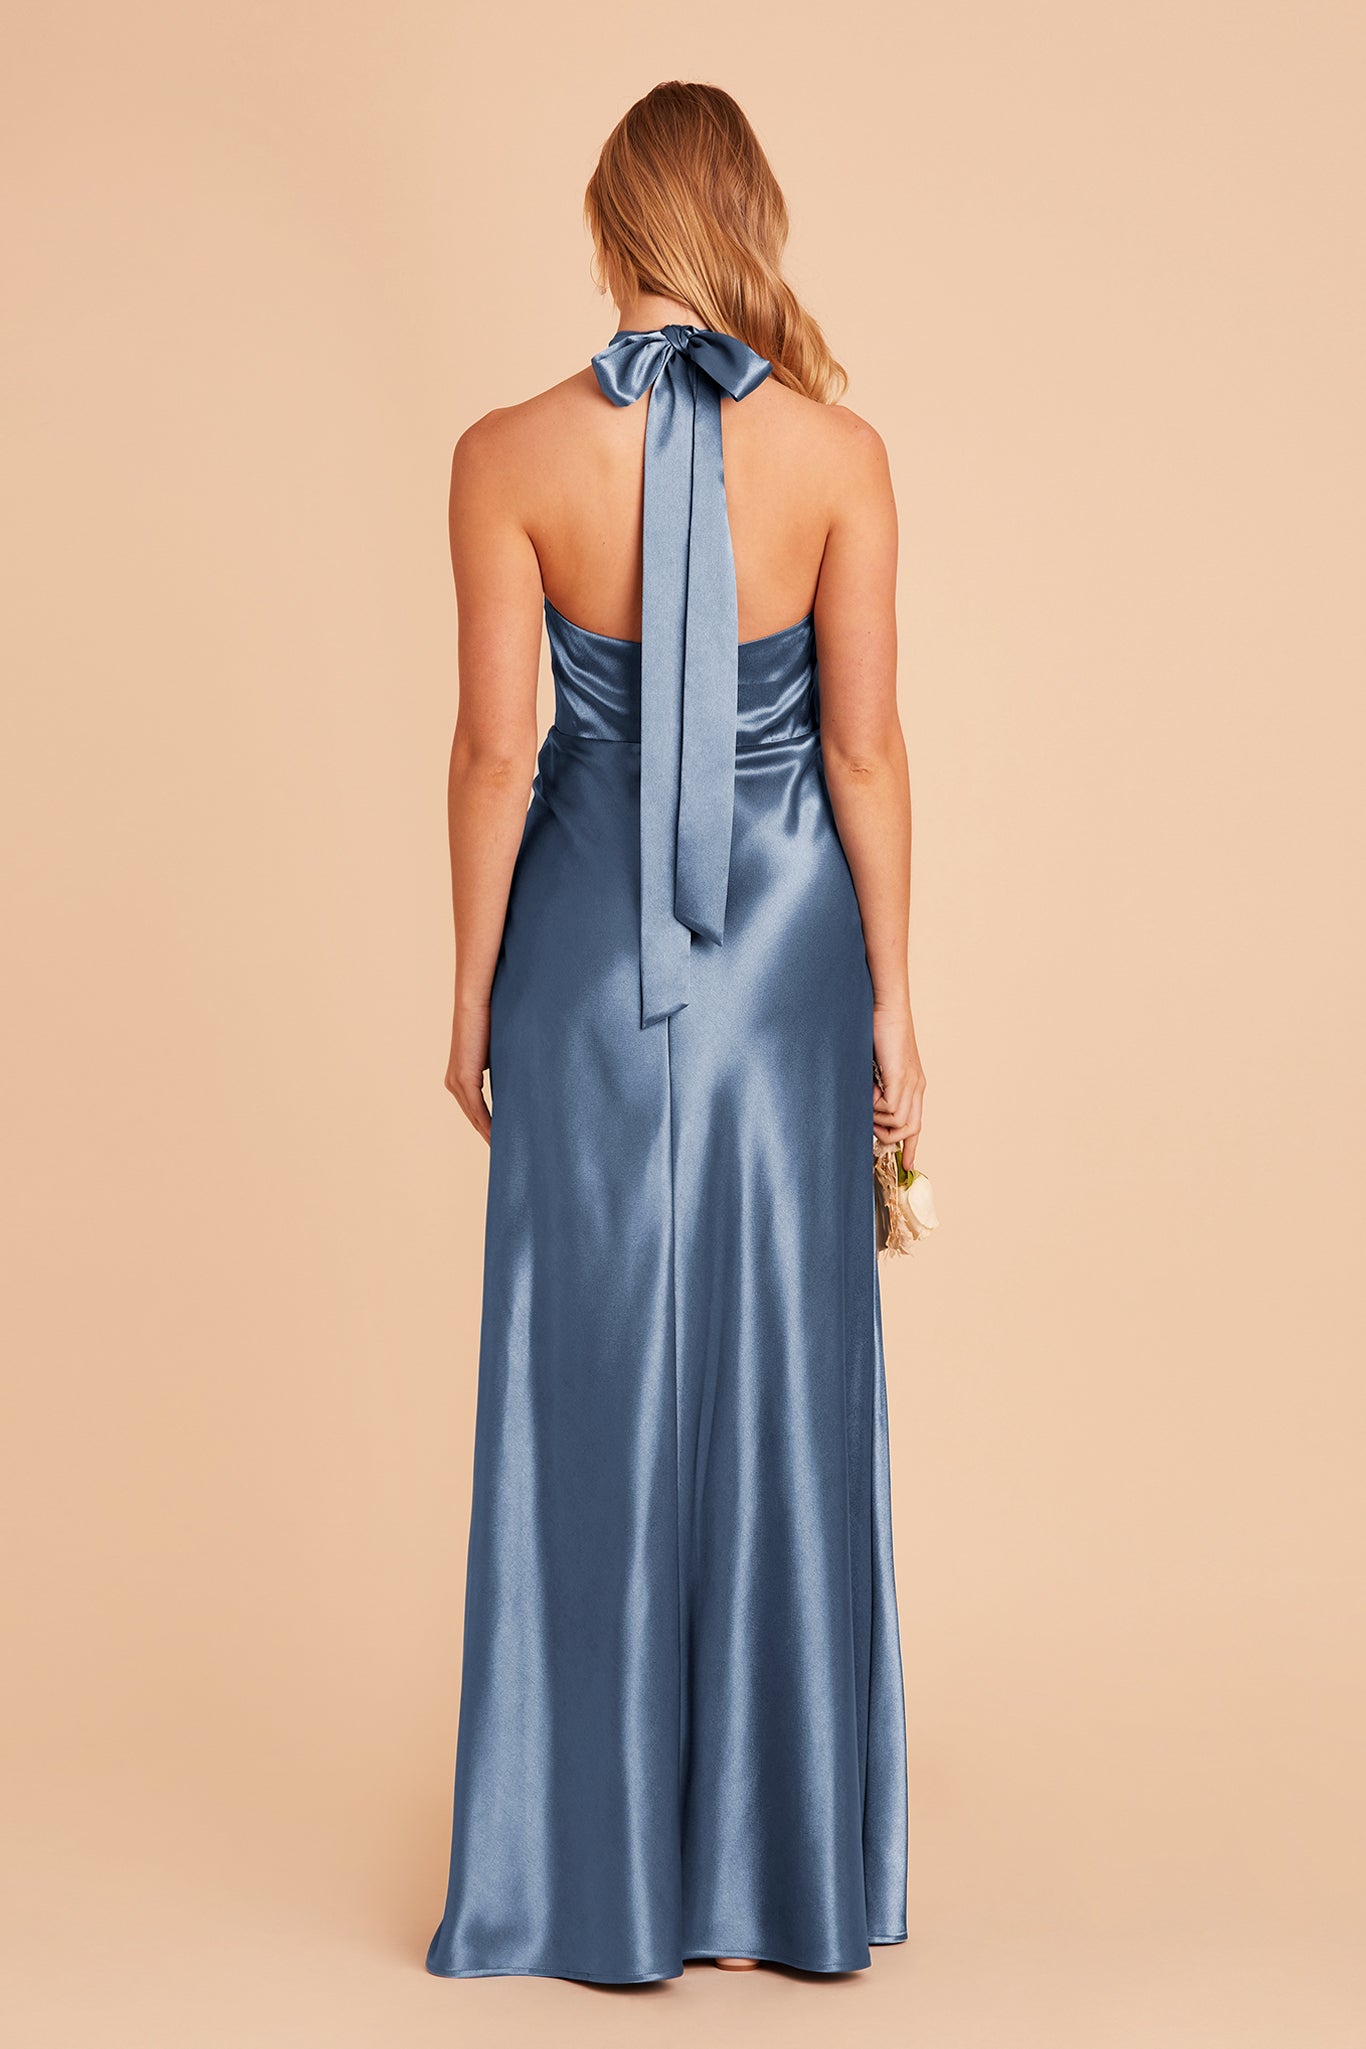 Monica bridesmaid dress with slit in twilight satin by Birdy Grey, back view